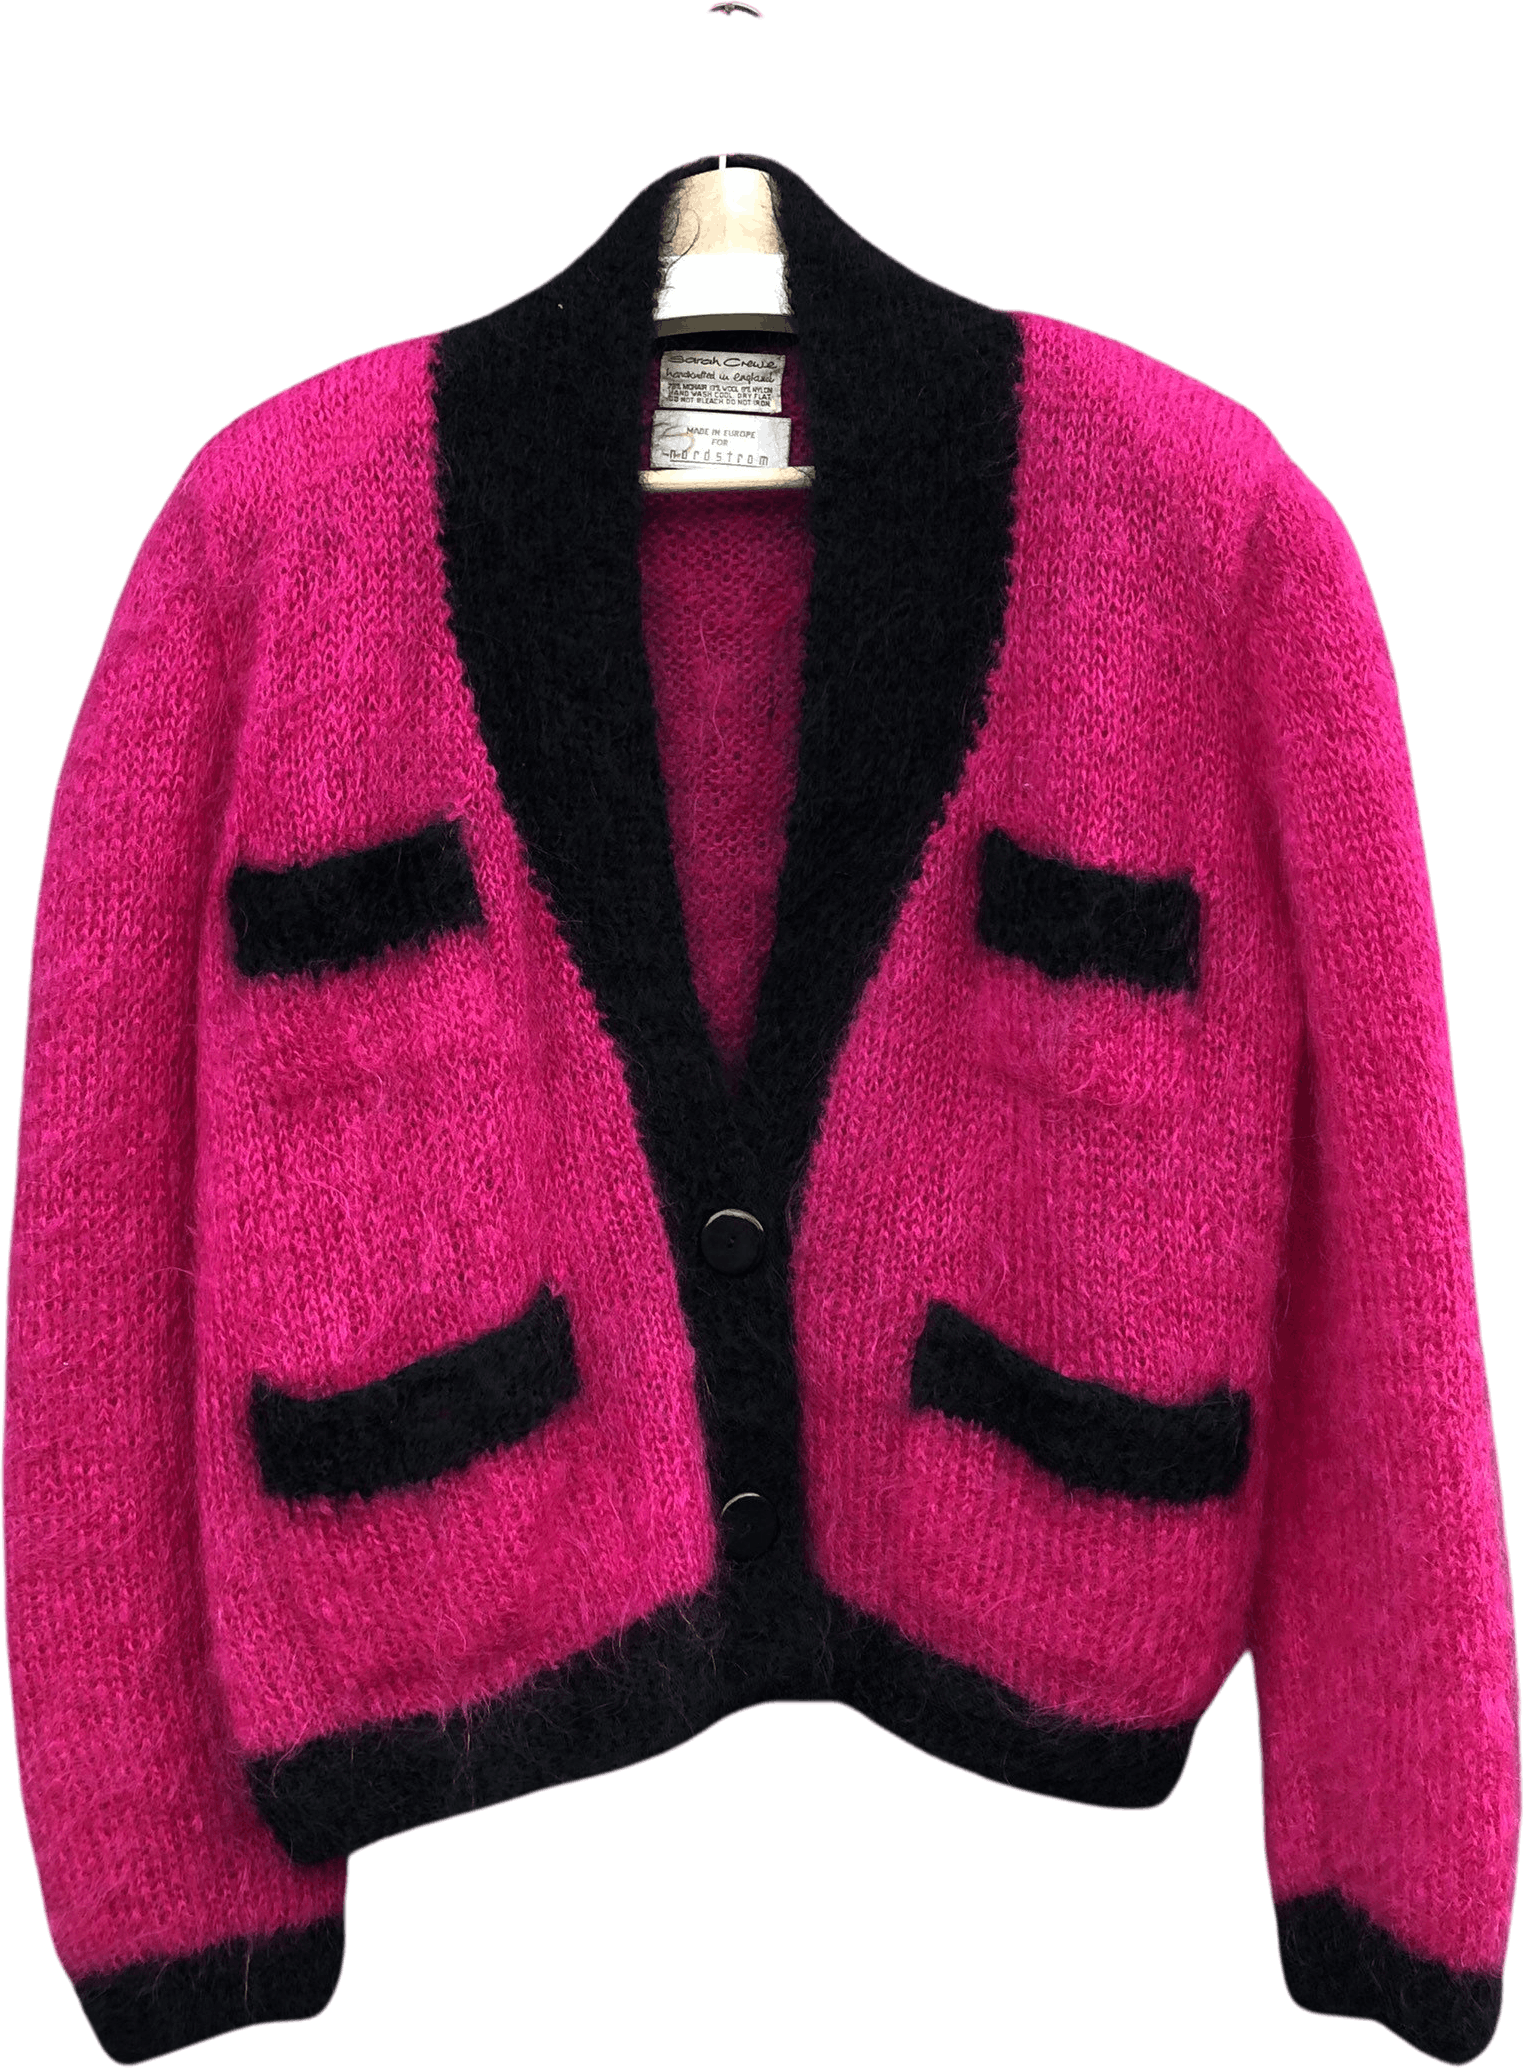 size ML 1980s Pretty in Pink Mohair & Wool Cardigan Sweater by Nordstrom